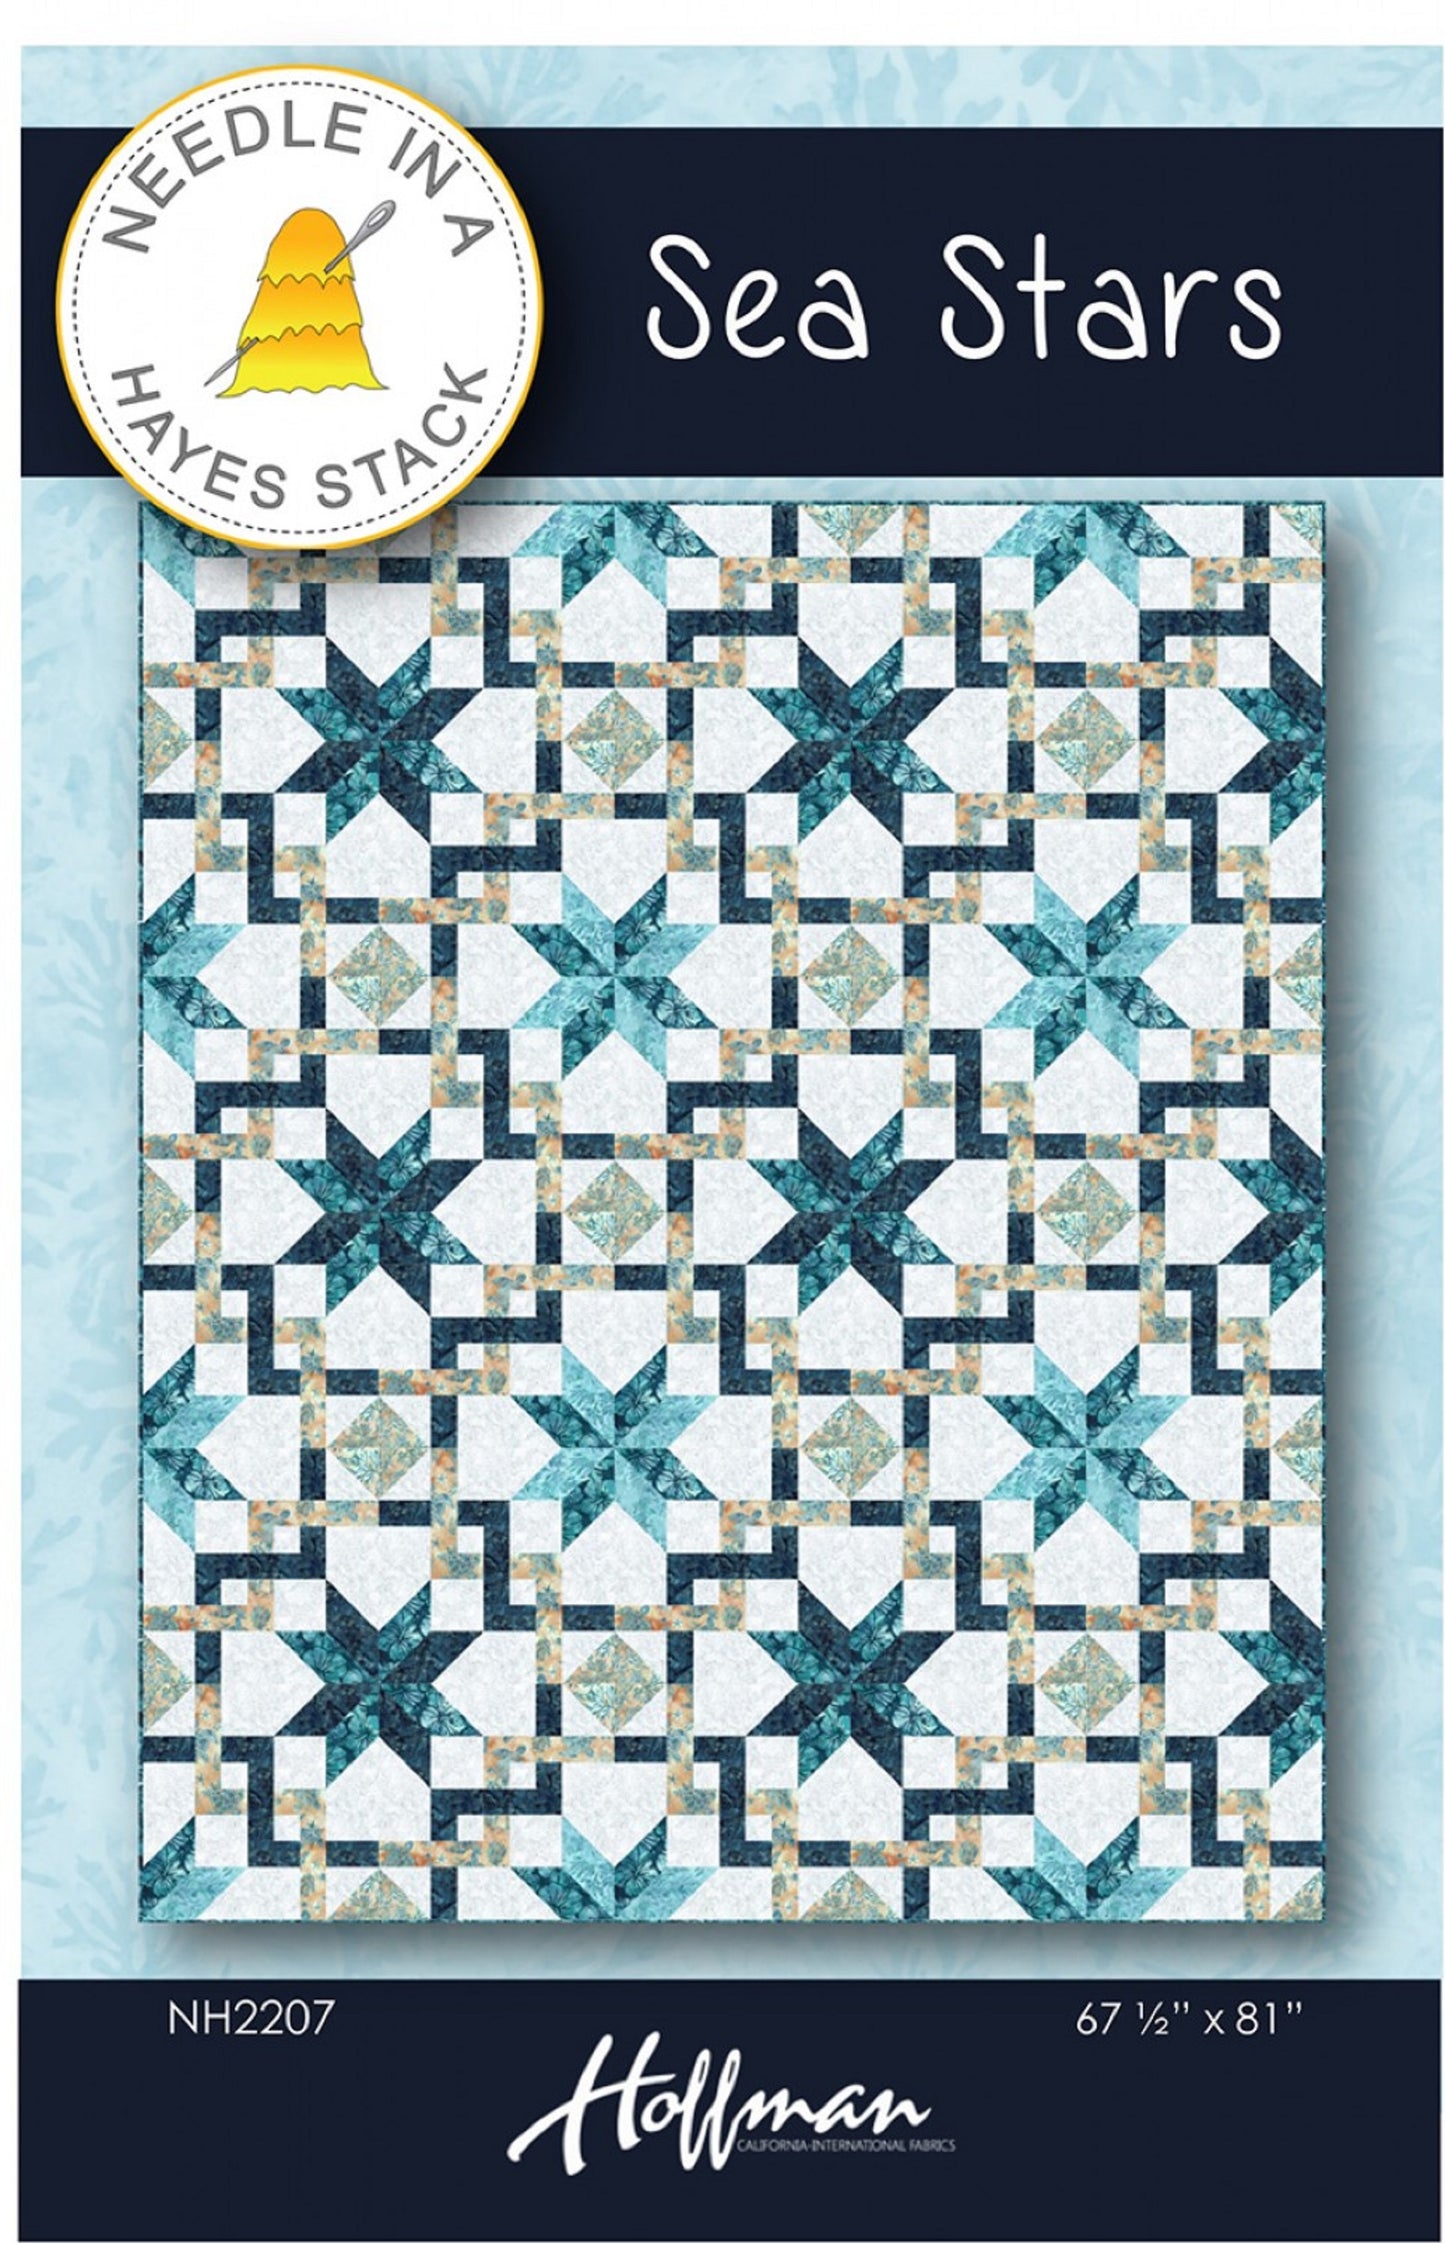 Sea Stars Quilt Pattern by Needle in a Hayes Stack For Hoffman Fabrics